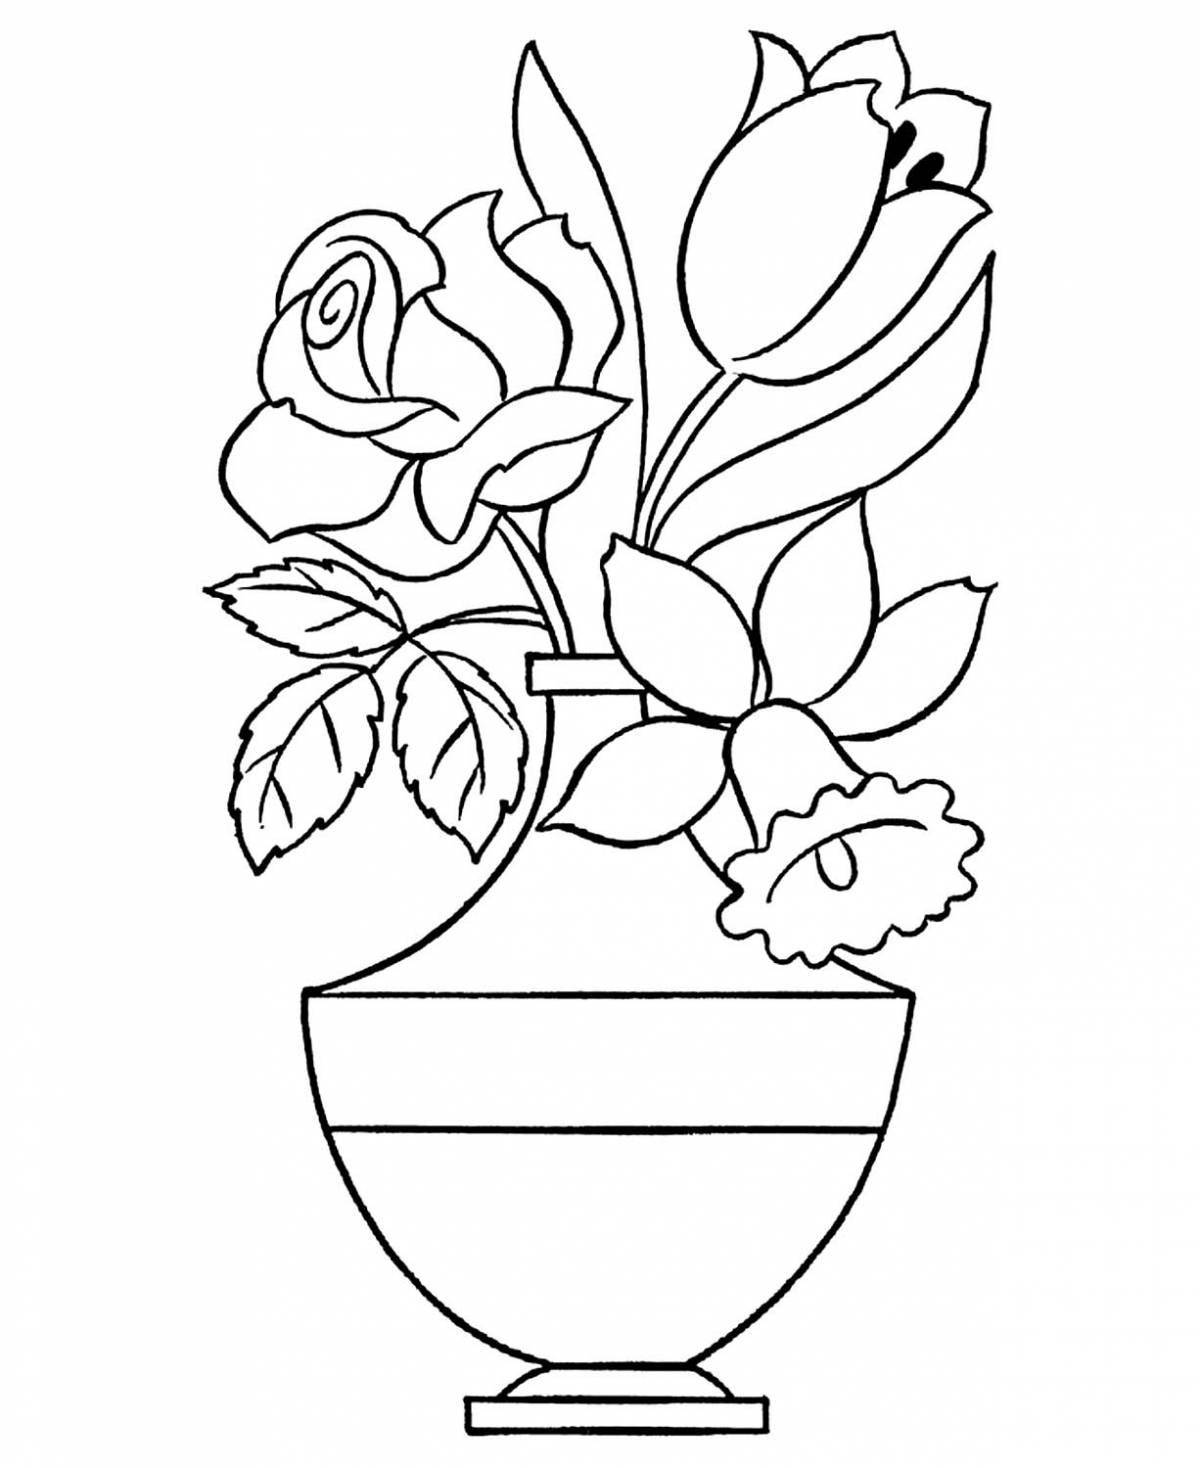 Coloring book exquisite vase of flowers